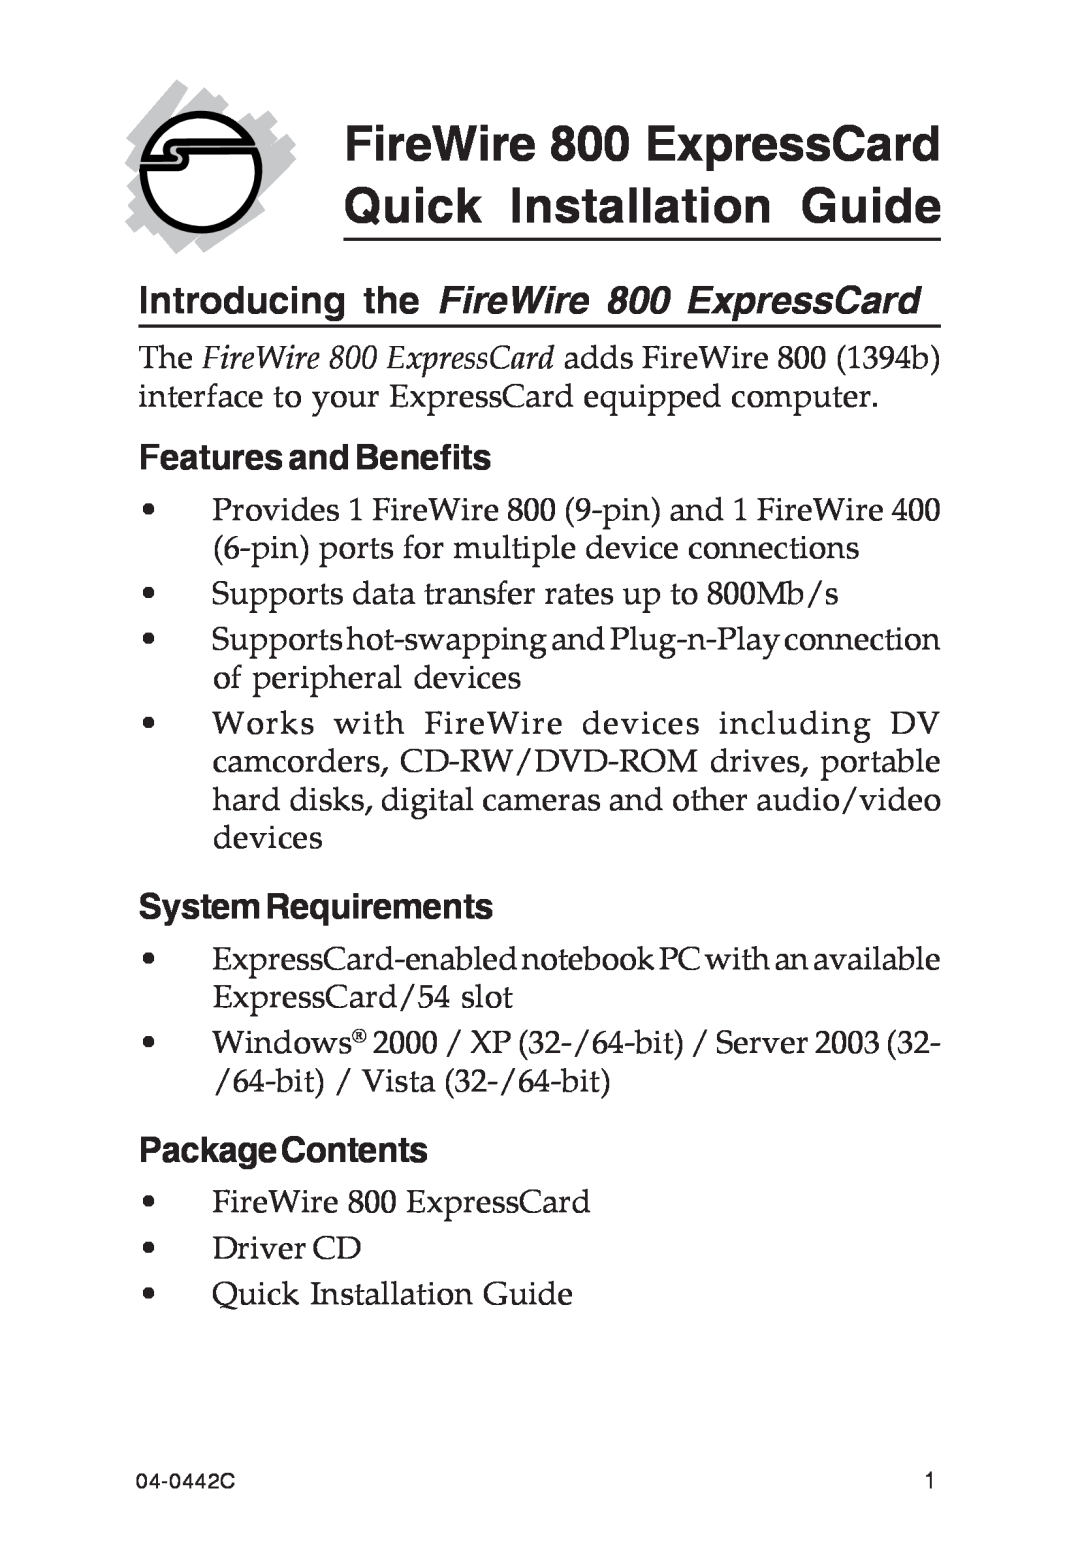 SIIG 700 manual Features and Benefits, SystemRequirements, PackageContents, Introducing the FireWire 800 ExpressCard 